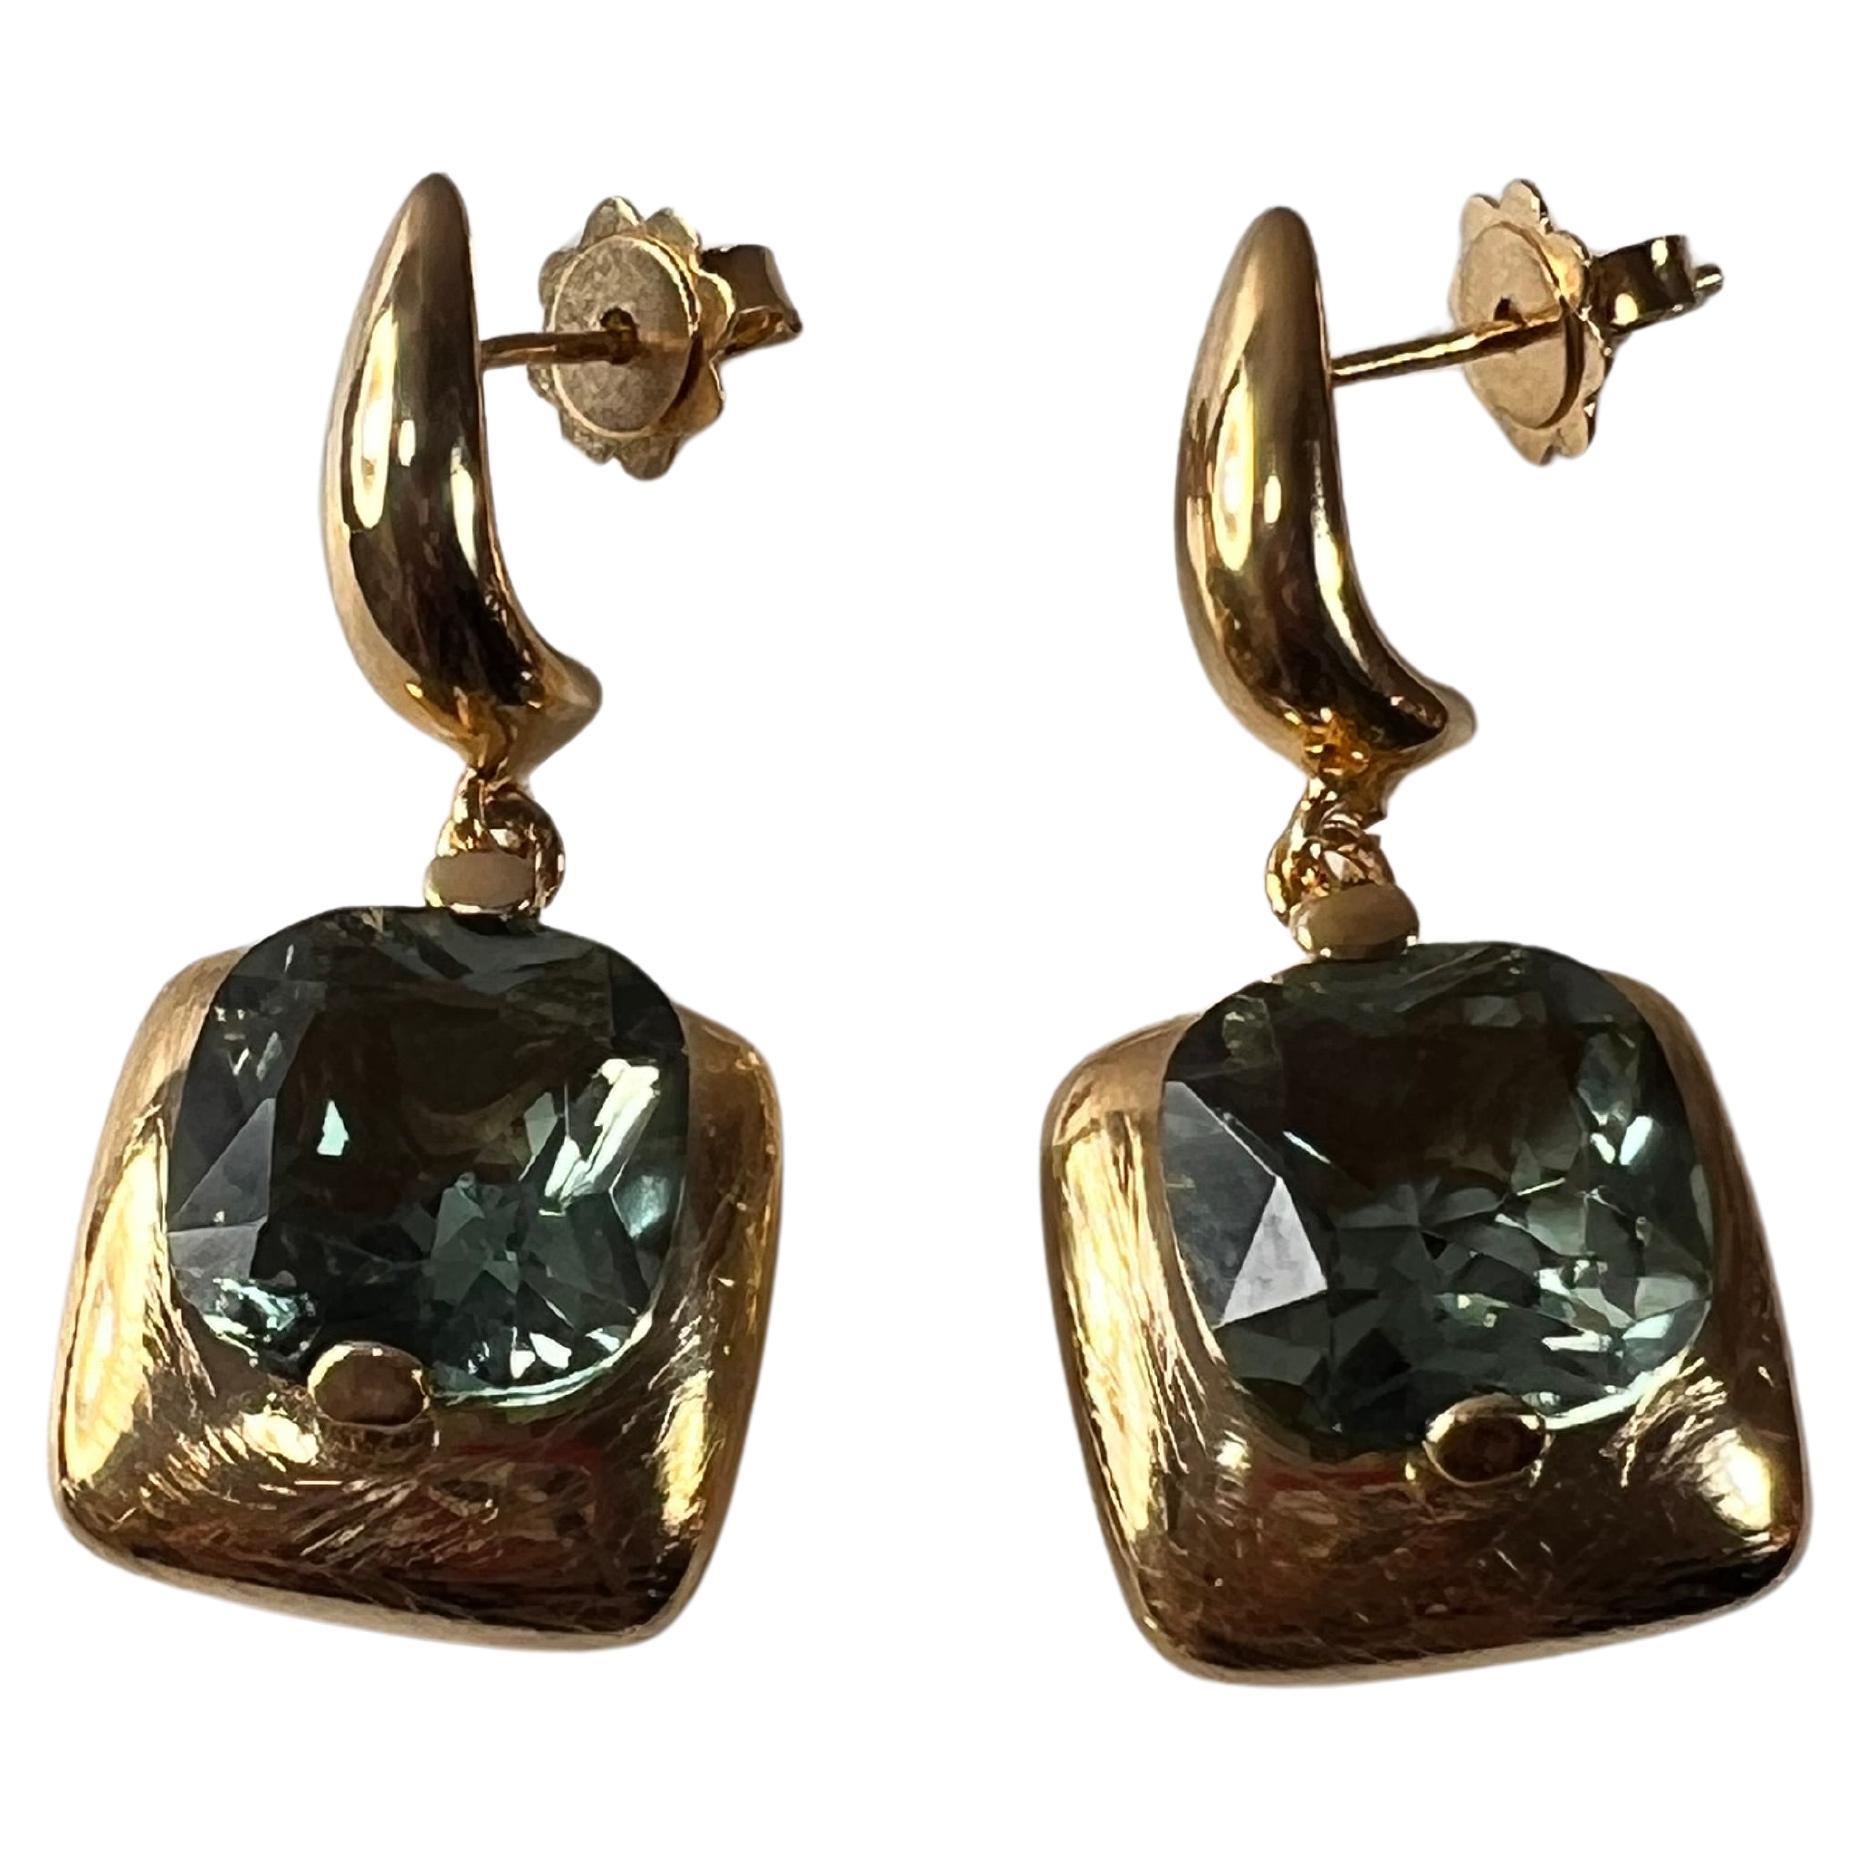 Eearrings with round brillant Quartz stone, in Silver 925/1000 e 24kt smooth and glossy Golden finish.  The quartz 12mm .  Earring Length 35mm or 1,37inches 
Option of 5 different colour quarts: Fumé, Cognac, Viola, Verde, Blu
N.B. If the chosen